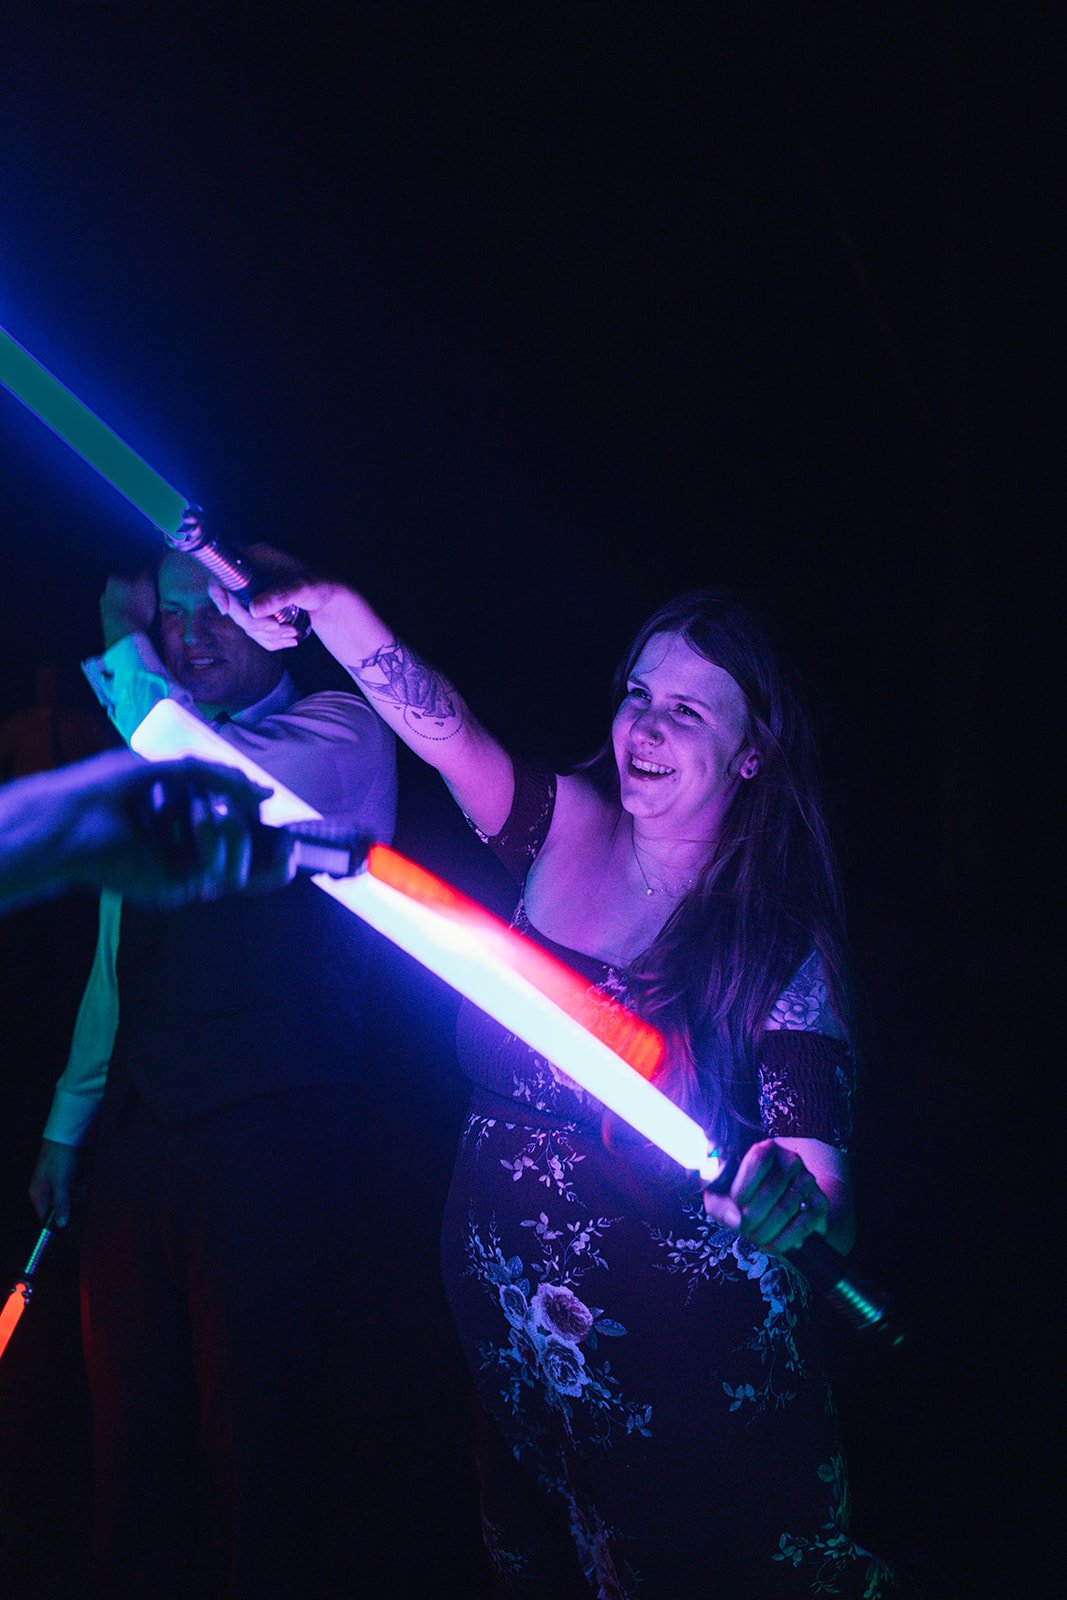 A photo of a wedding guest with a purple lightsaber.